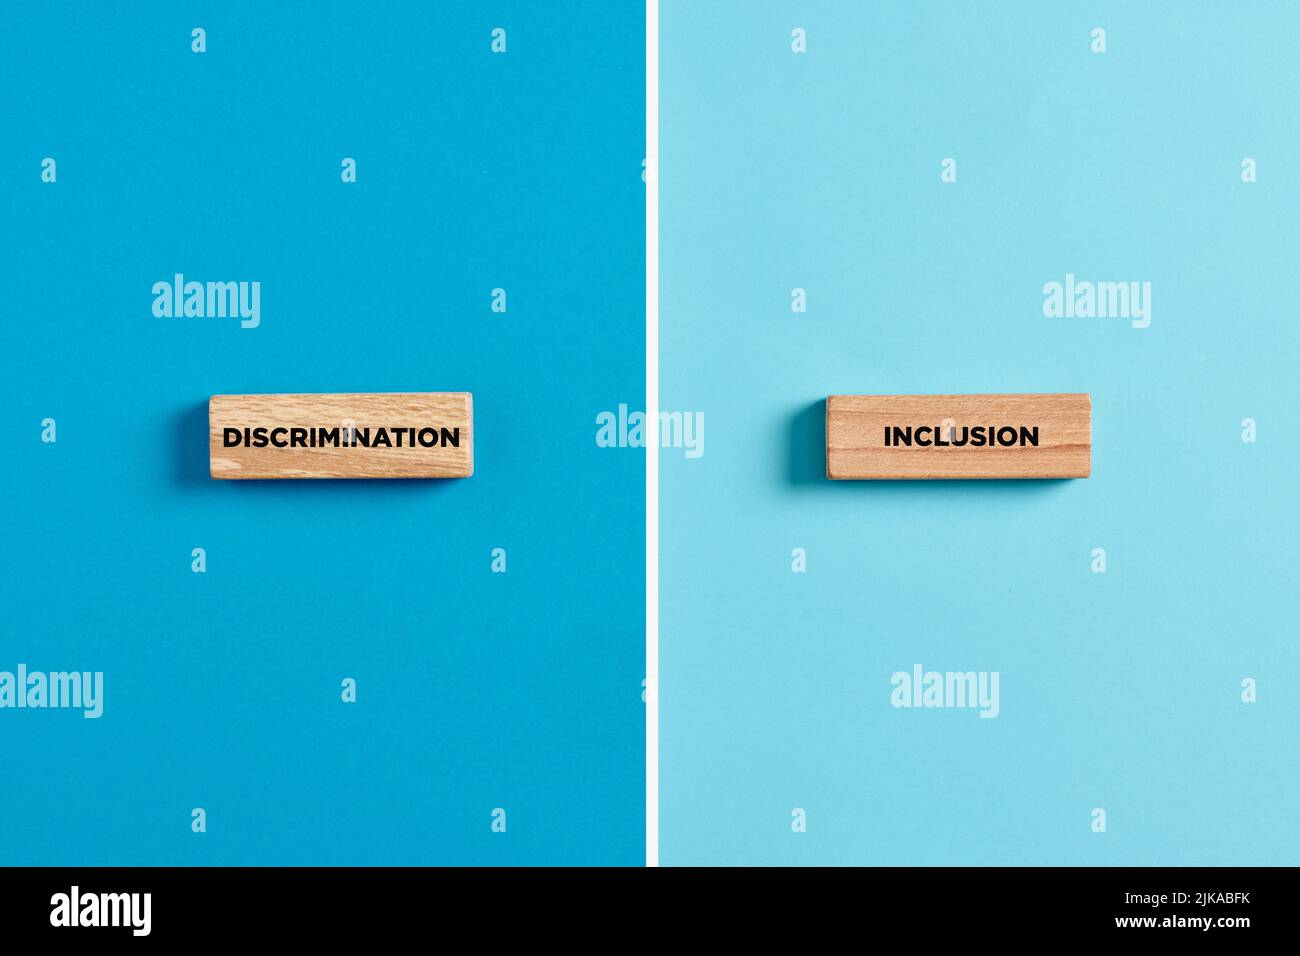 The words discrimination and inclusion on wooden blocks. Dilemma or choice between discrimination or inclusion concept. Stock Photo